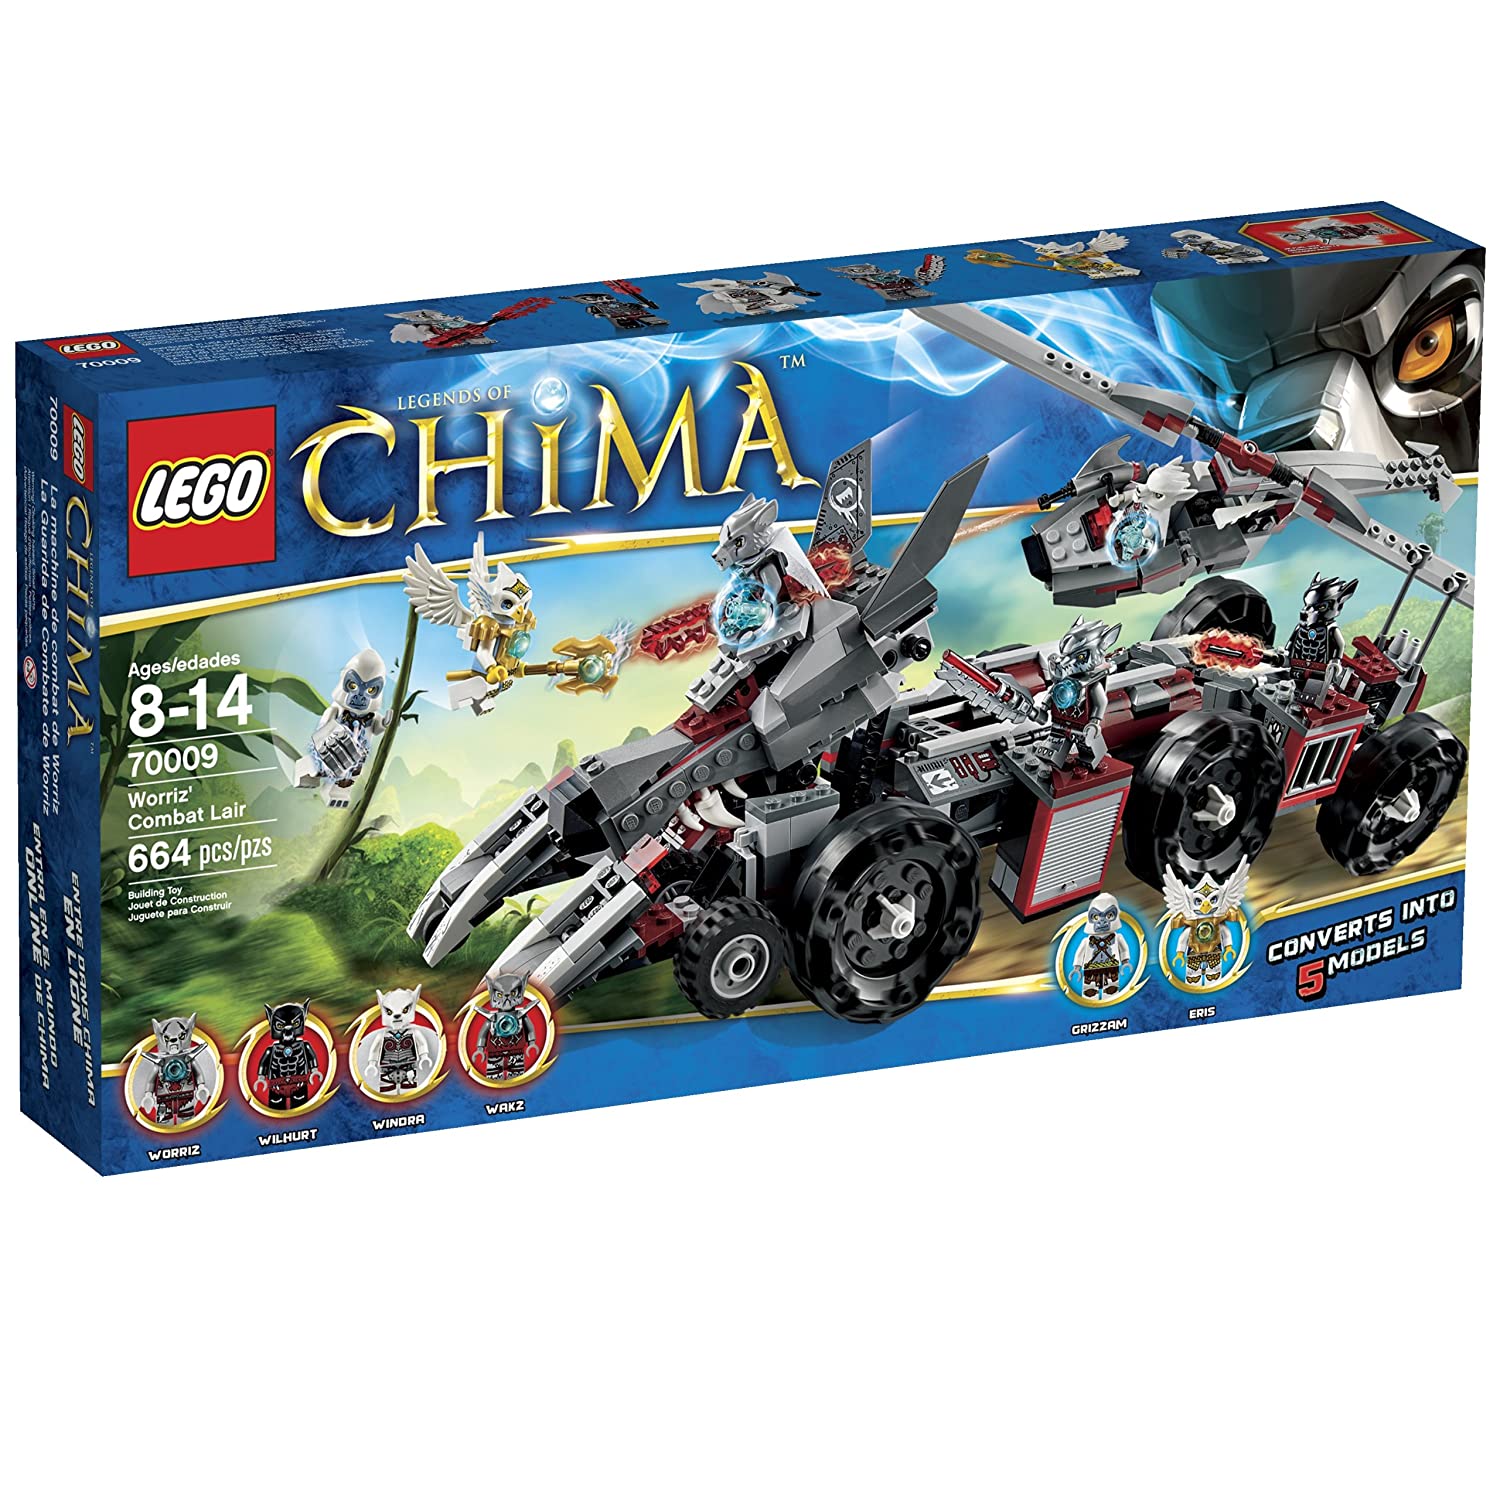 9 Best LEGO Chima Sets 2023 - Buying Guide & Reviews 8